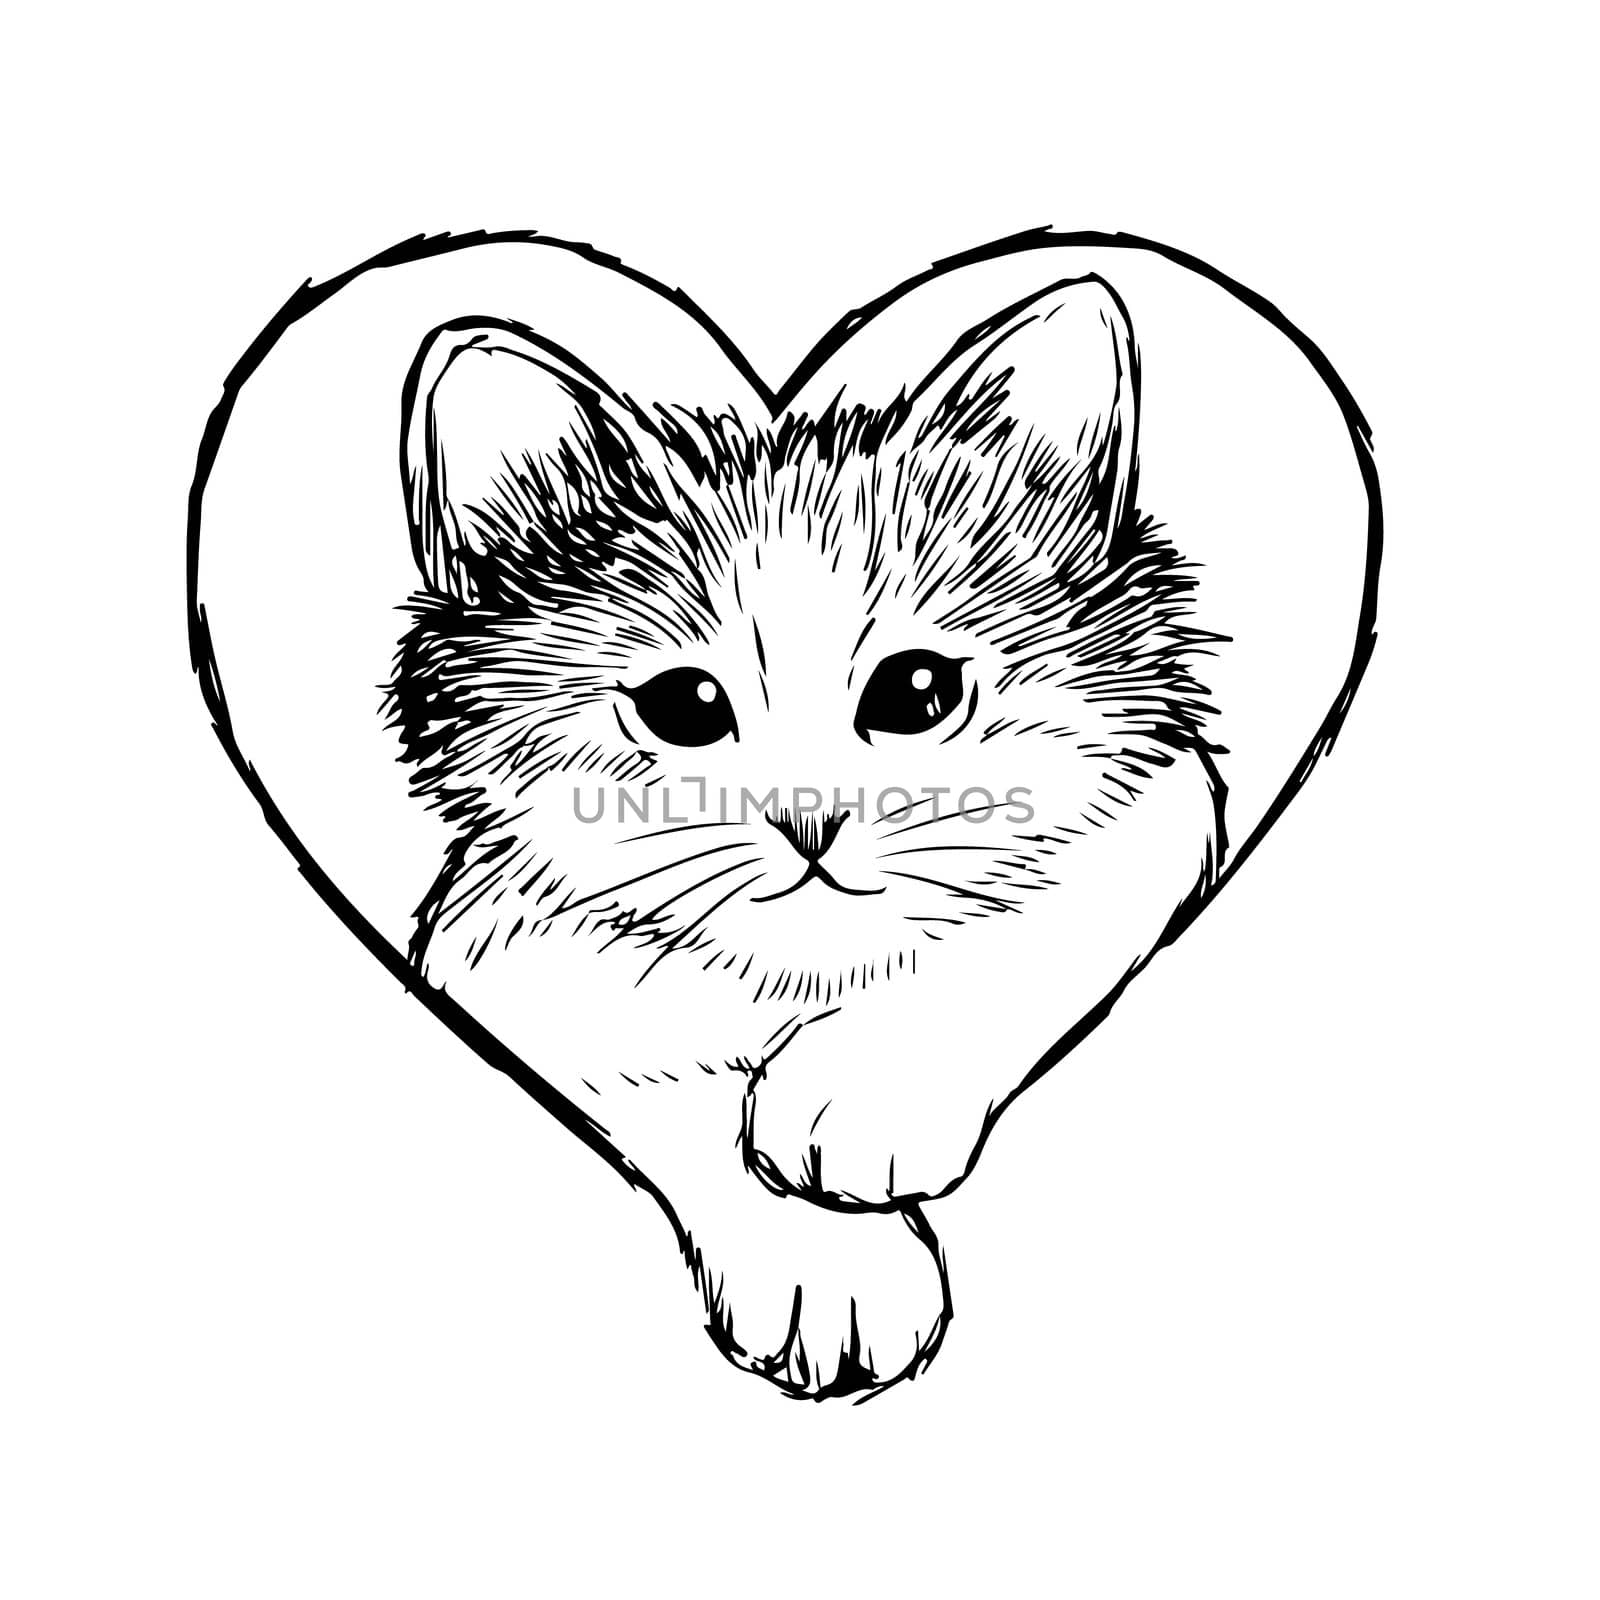 Little cat in heart frame hand drawn isolated on white background